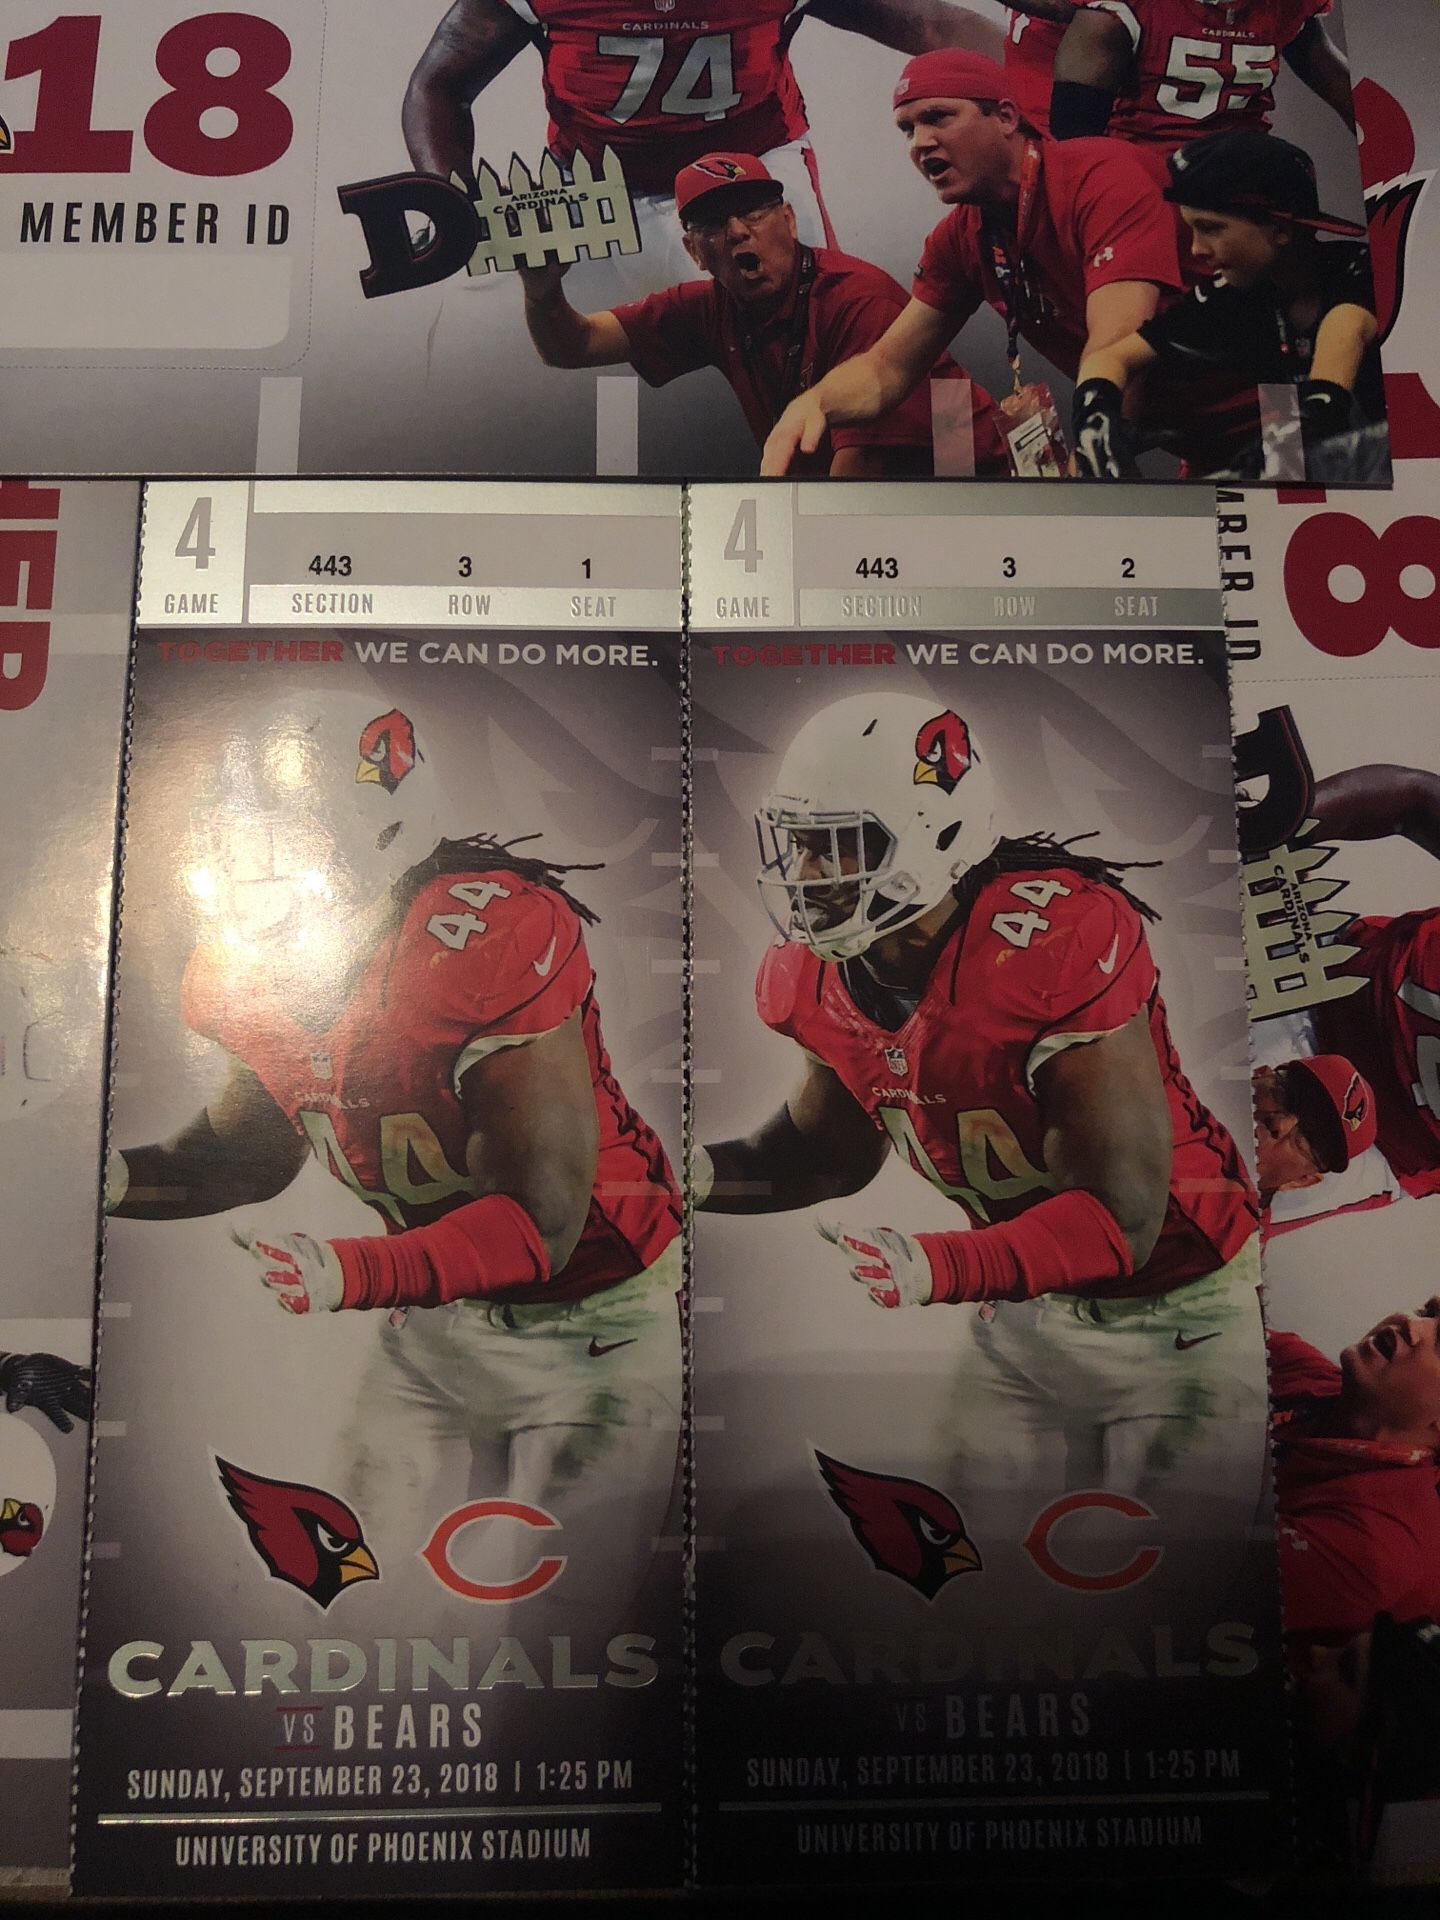 ARIZONA CARDINALS 3RD ROW VISITOR SIDE 45 YD LINE TICKETS EVERY HOME GAME